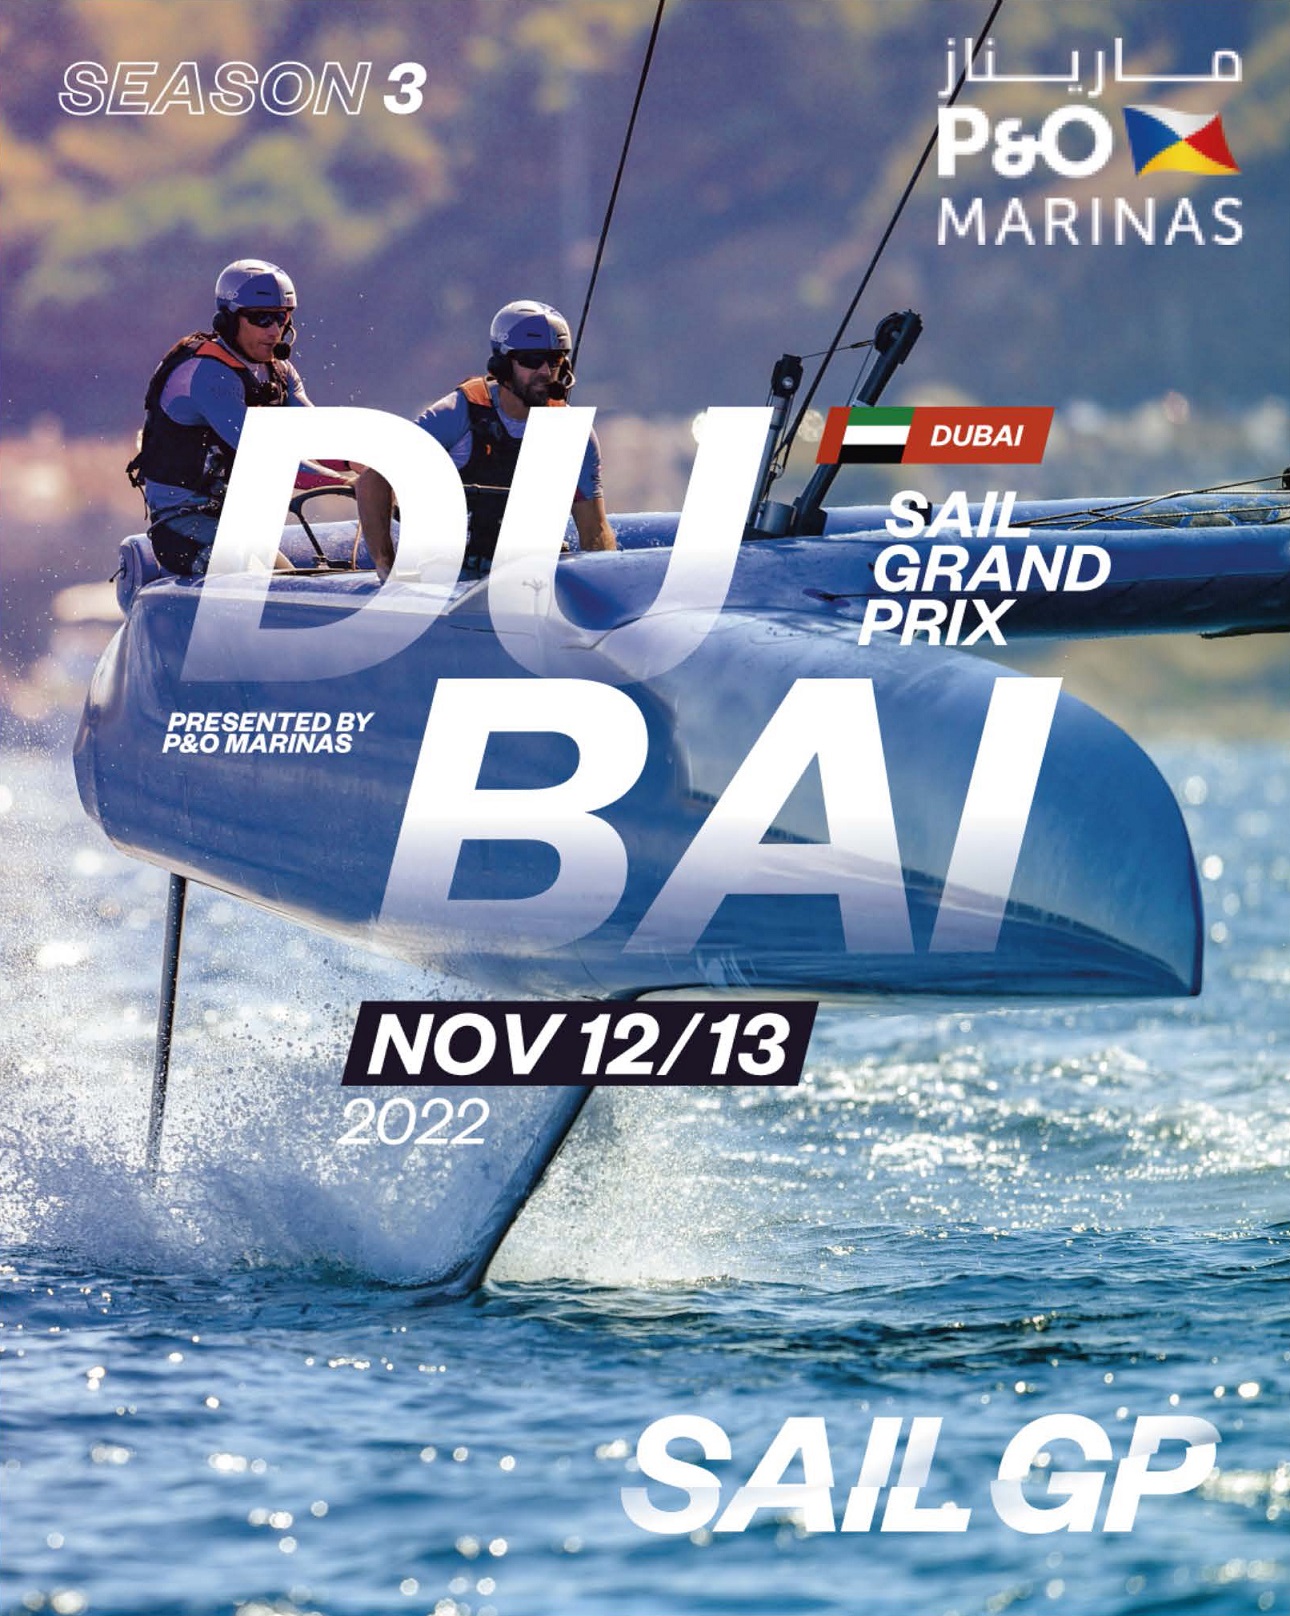 All eyes on Dubai as SailGP edges closer to Middle East debut